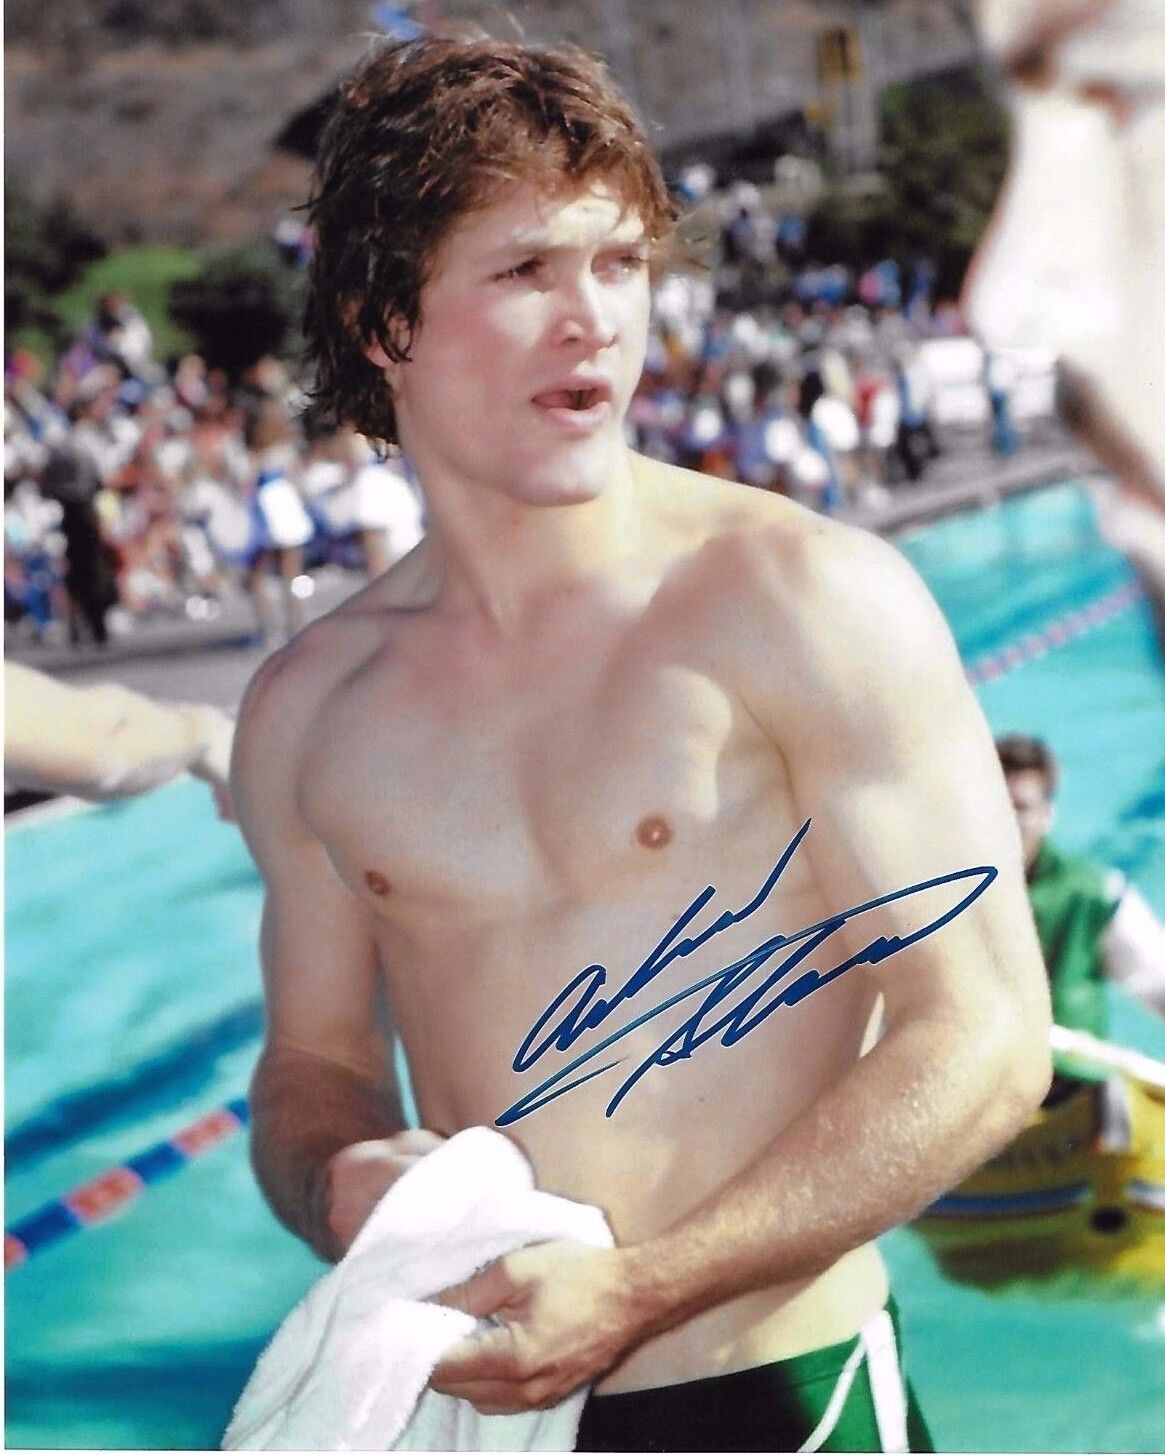 Andrew Stevens Signed 8x10 Photo Poster painting - BATTLE OF THE NETWORK STARS - SEXY!!! G602